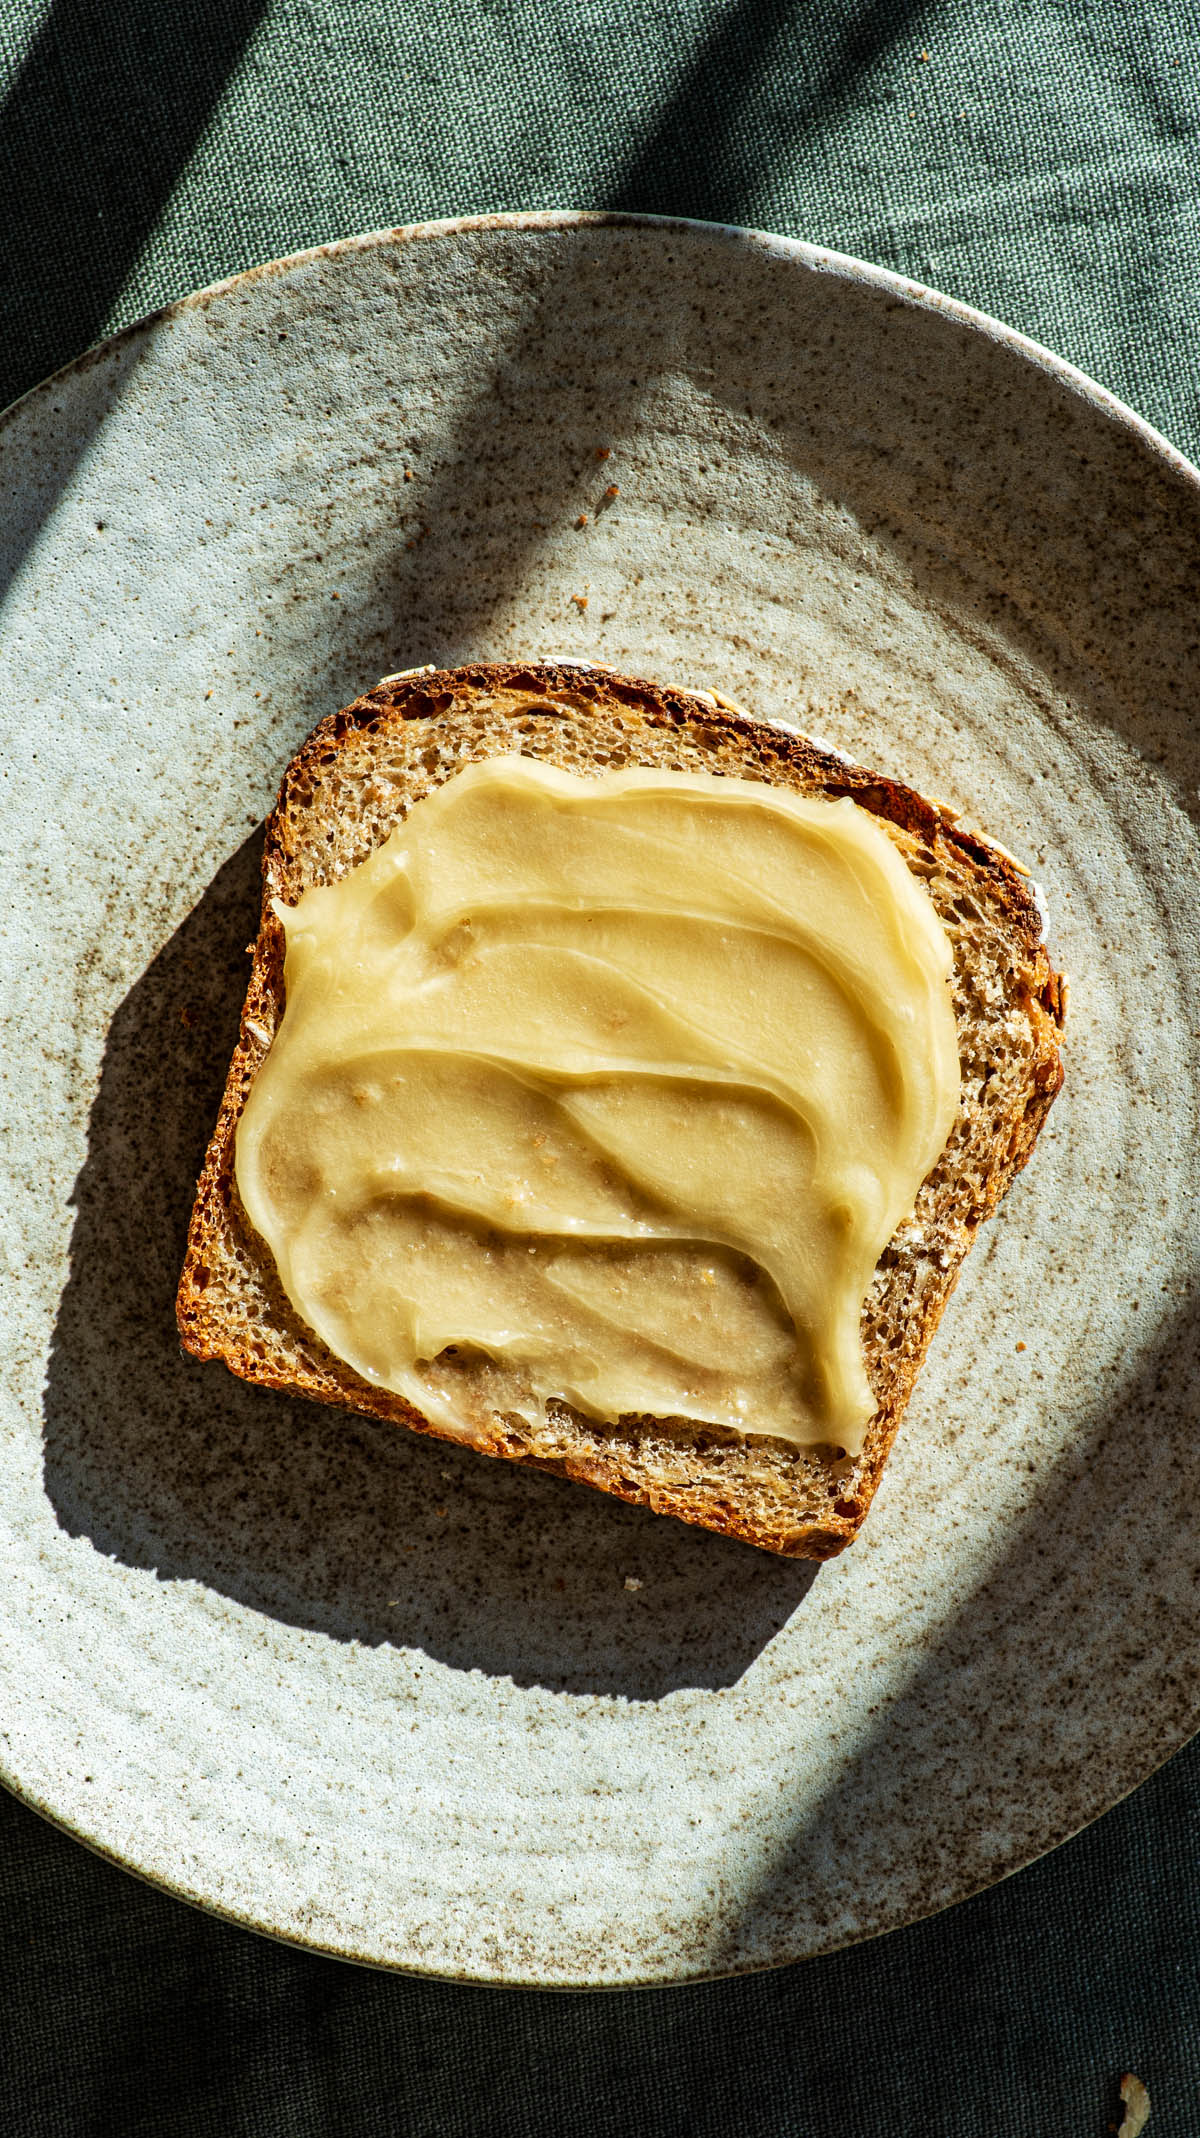 Slice of bread on a plate with honey.